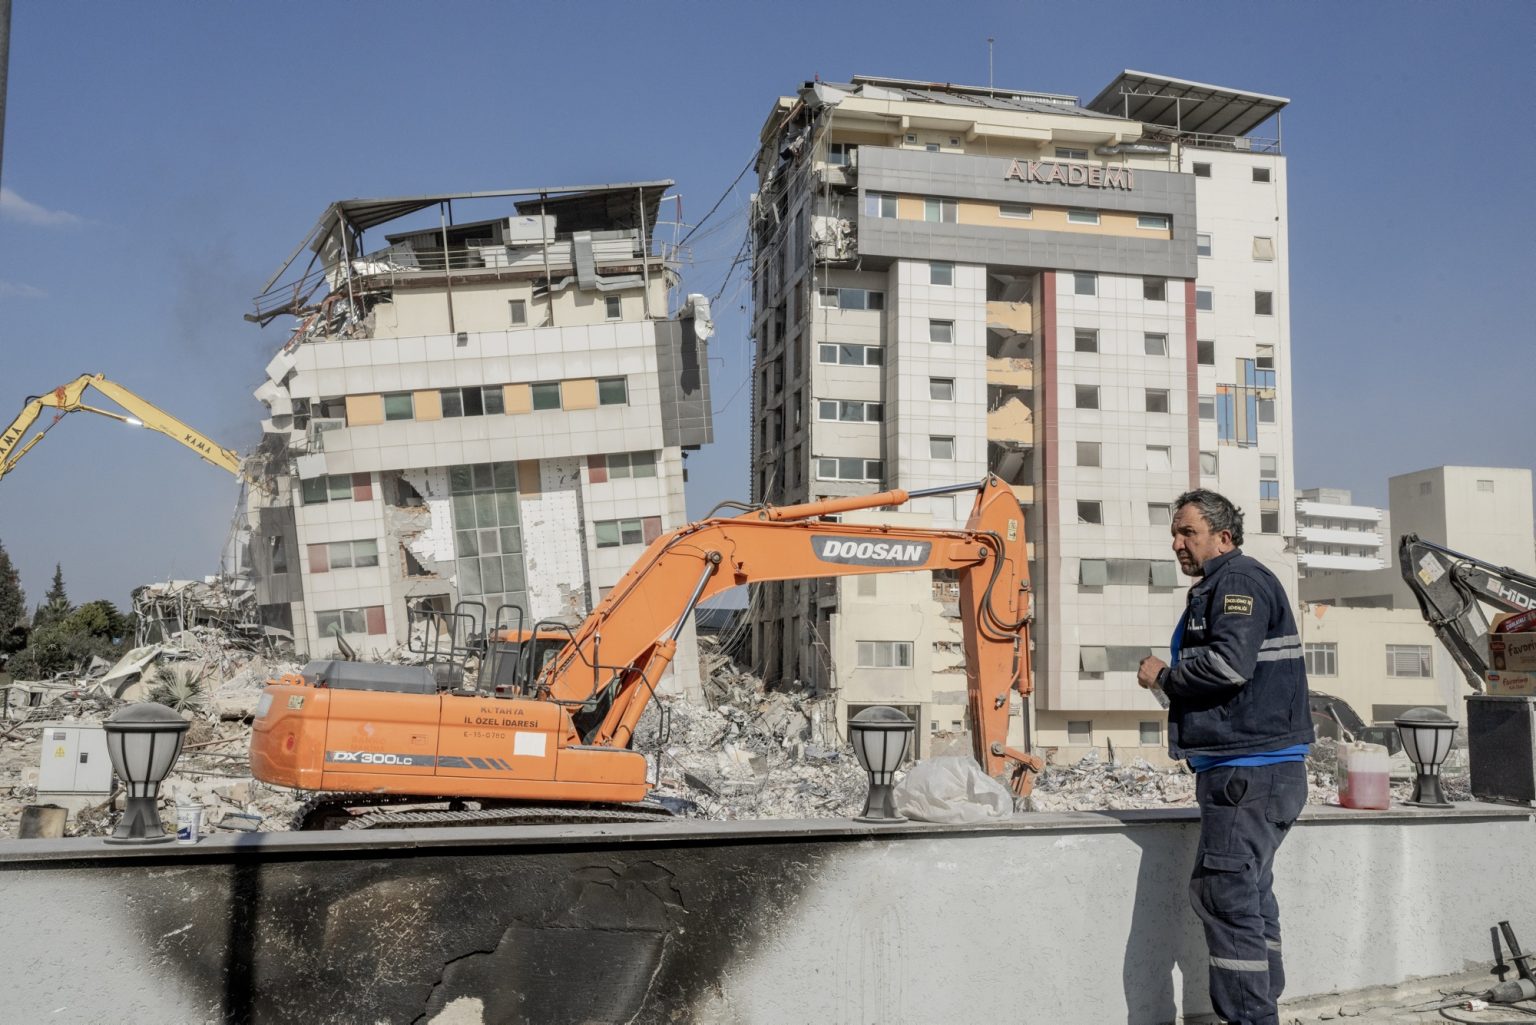 Antakya, Turkey, February 2023 - The aftermath of the earthquake that hit southern Turkey and northern Syria.  The earthquake-damaged academy hospital of the city of Antakya is torn down by authorities.><
Antakya, Turchia, febbraio 2023  Le conseguenze del terremoto che ha colpito la Turchia del Sud e la Siria del nord.